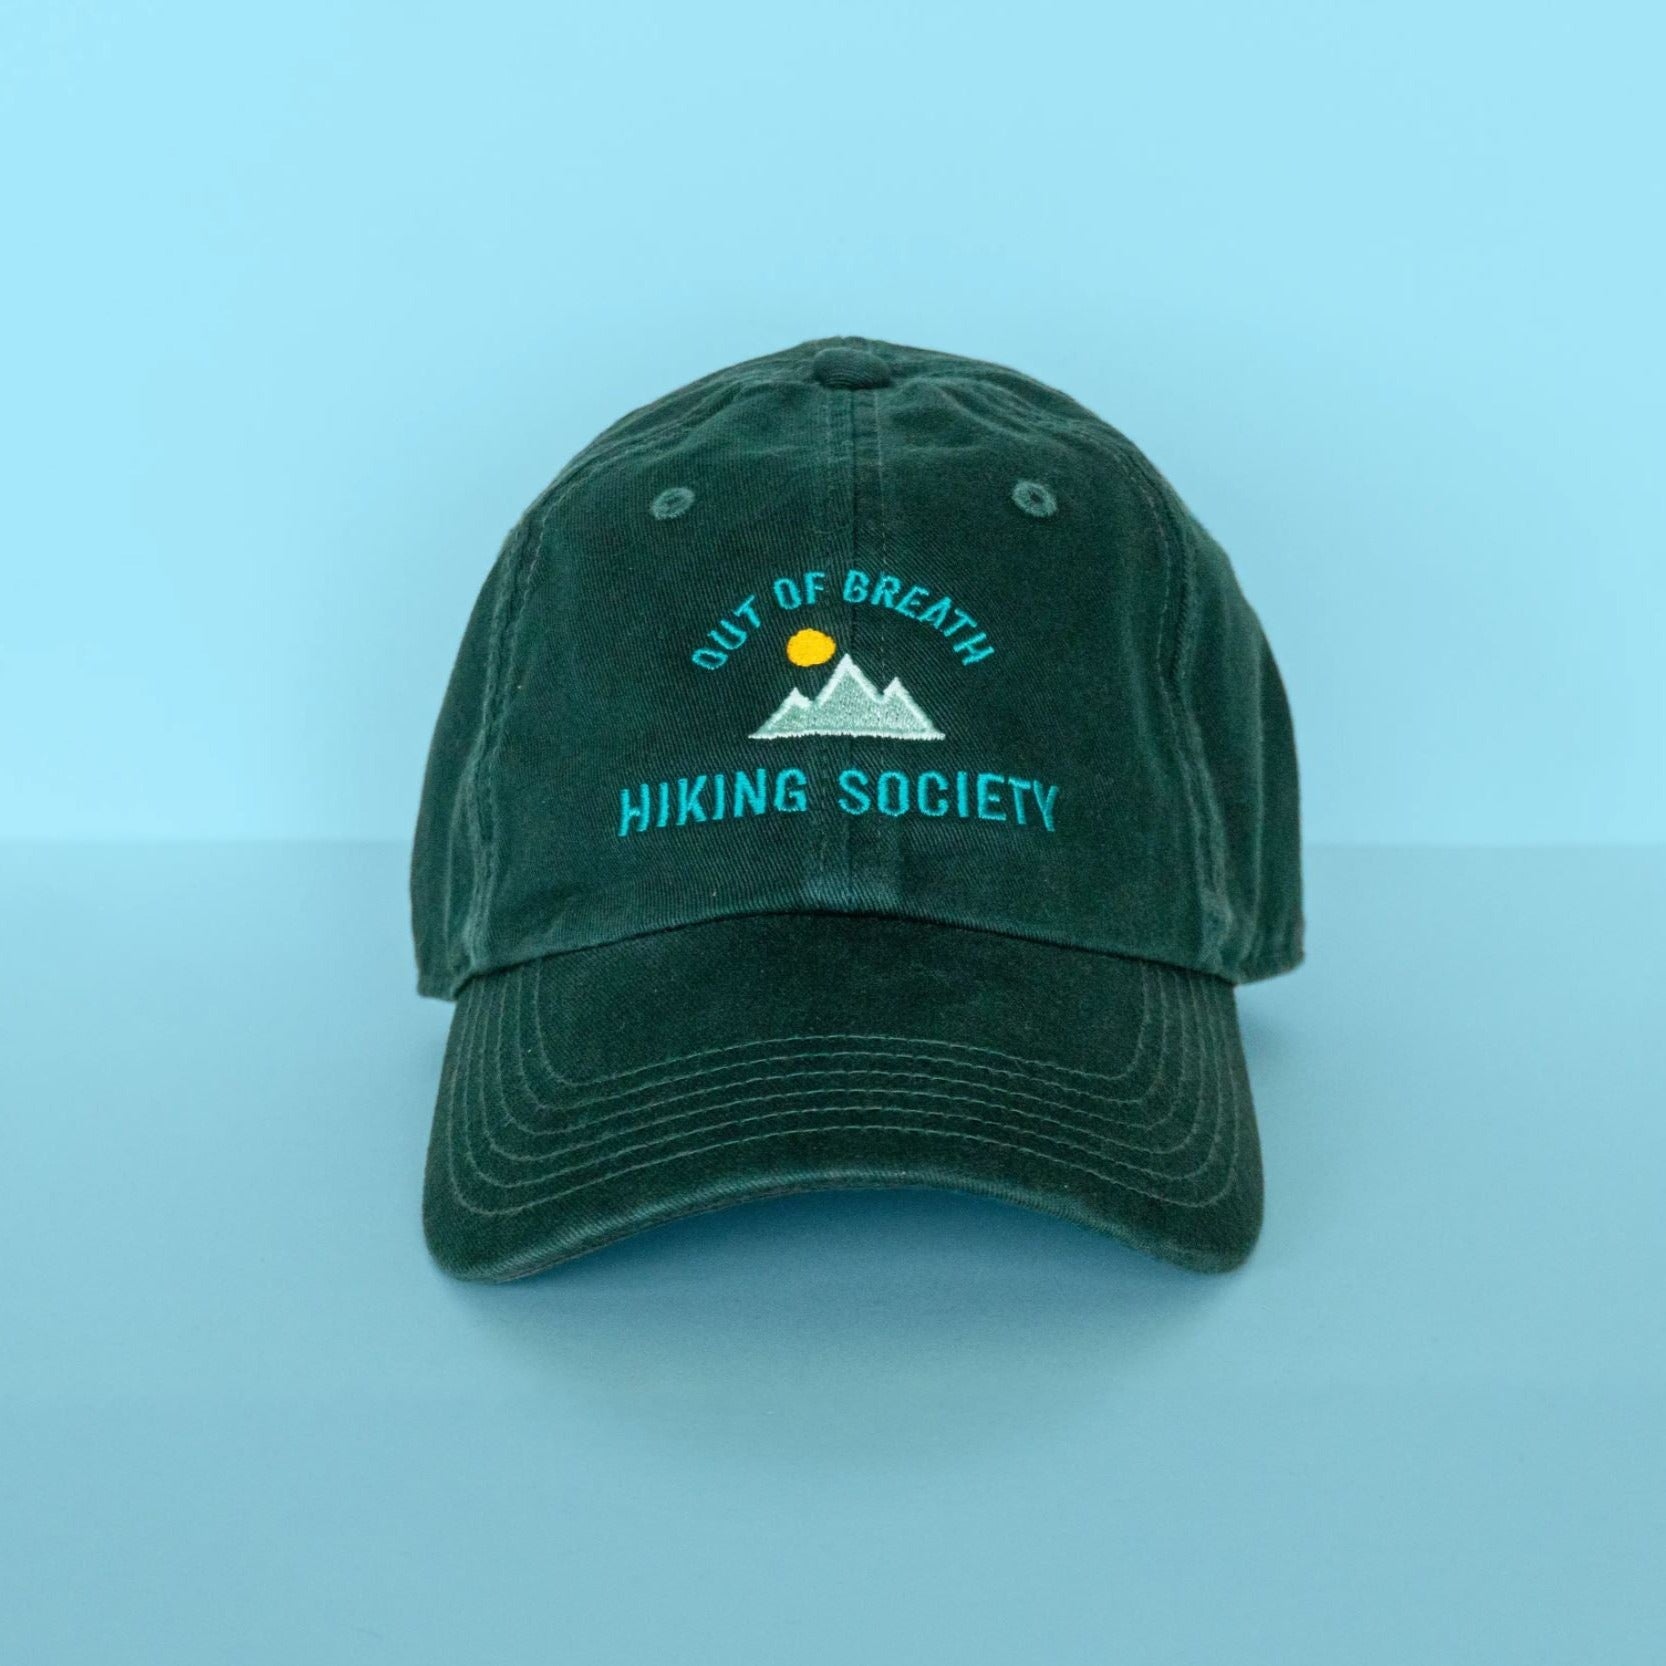 Out of Breath Hiking Society Embroidered Hat